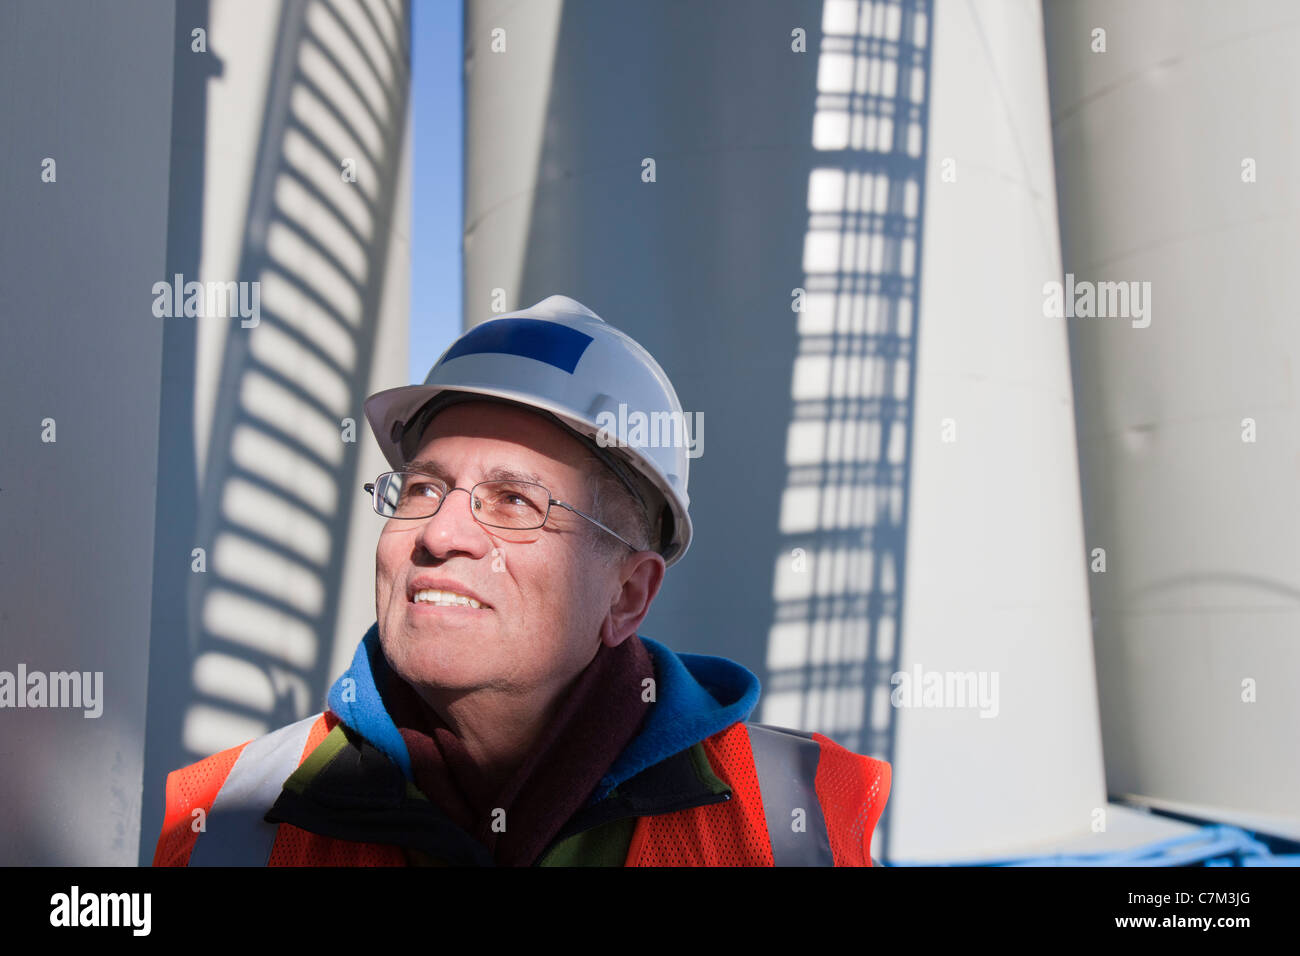 Engineer at a construction site Stock Photo